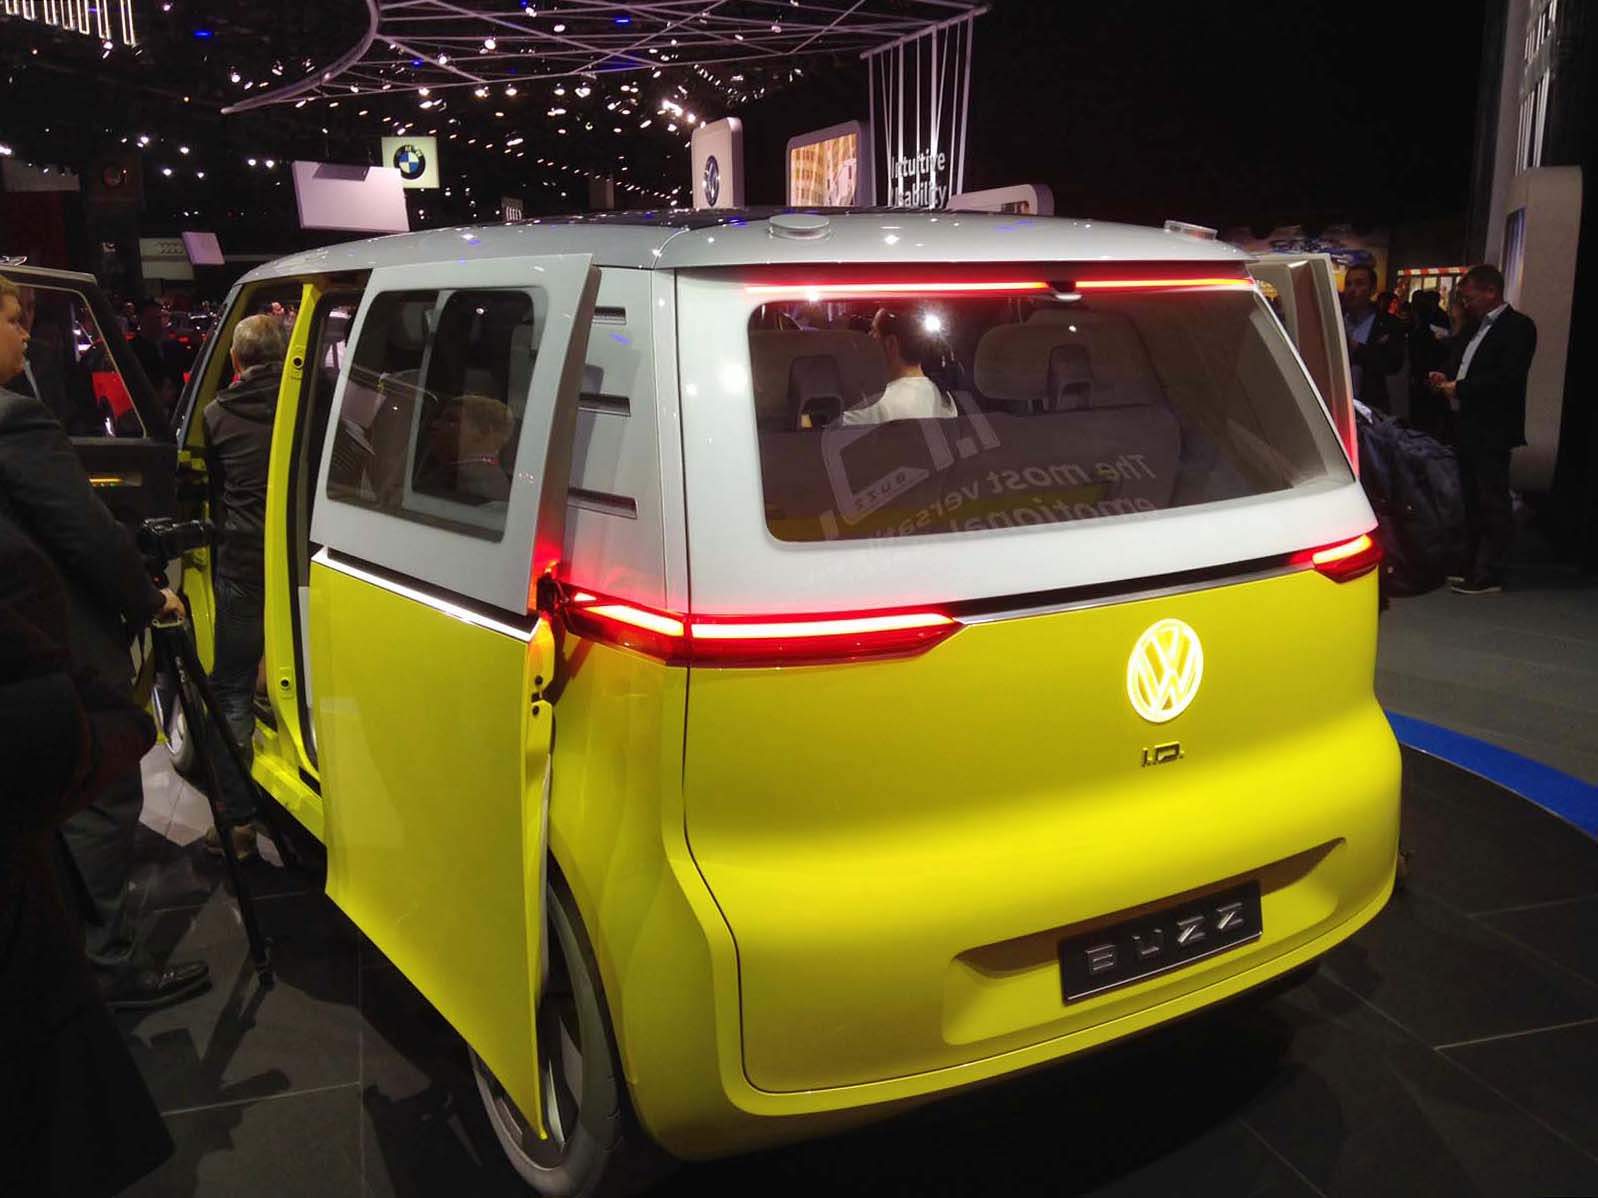 MB: This retro-groovy concept deserves at least a shout-out for its audacious concept that combines a flexible eight-seater all-electric platform with 369 silent horsepower and a potential 432 km worth of range. If only they hadn’t come out with so many other VW Minibus-inspired concepts that went nowhere....